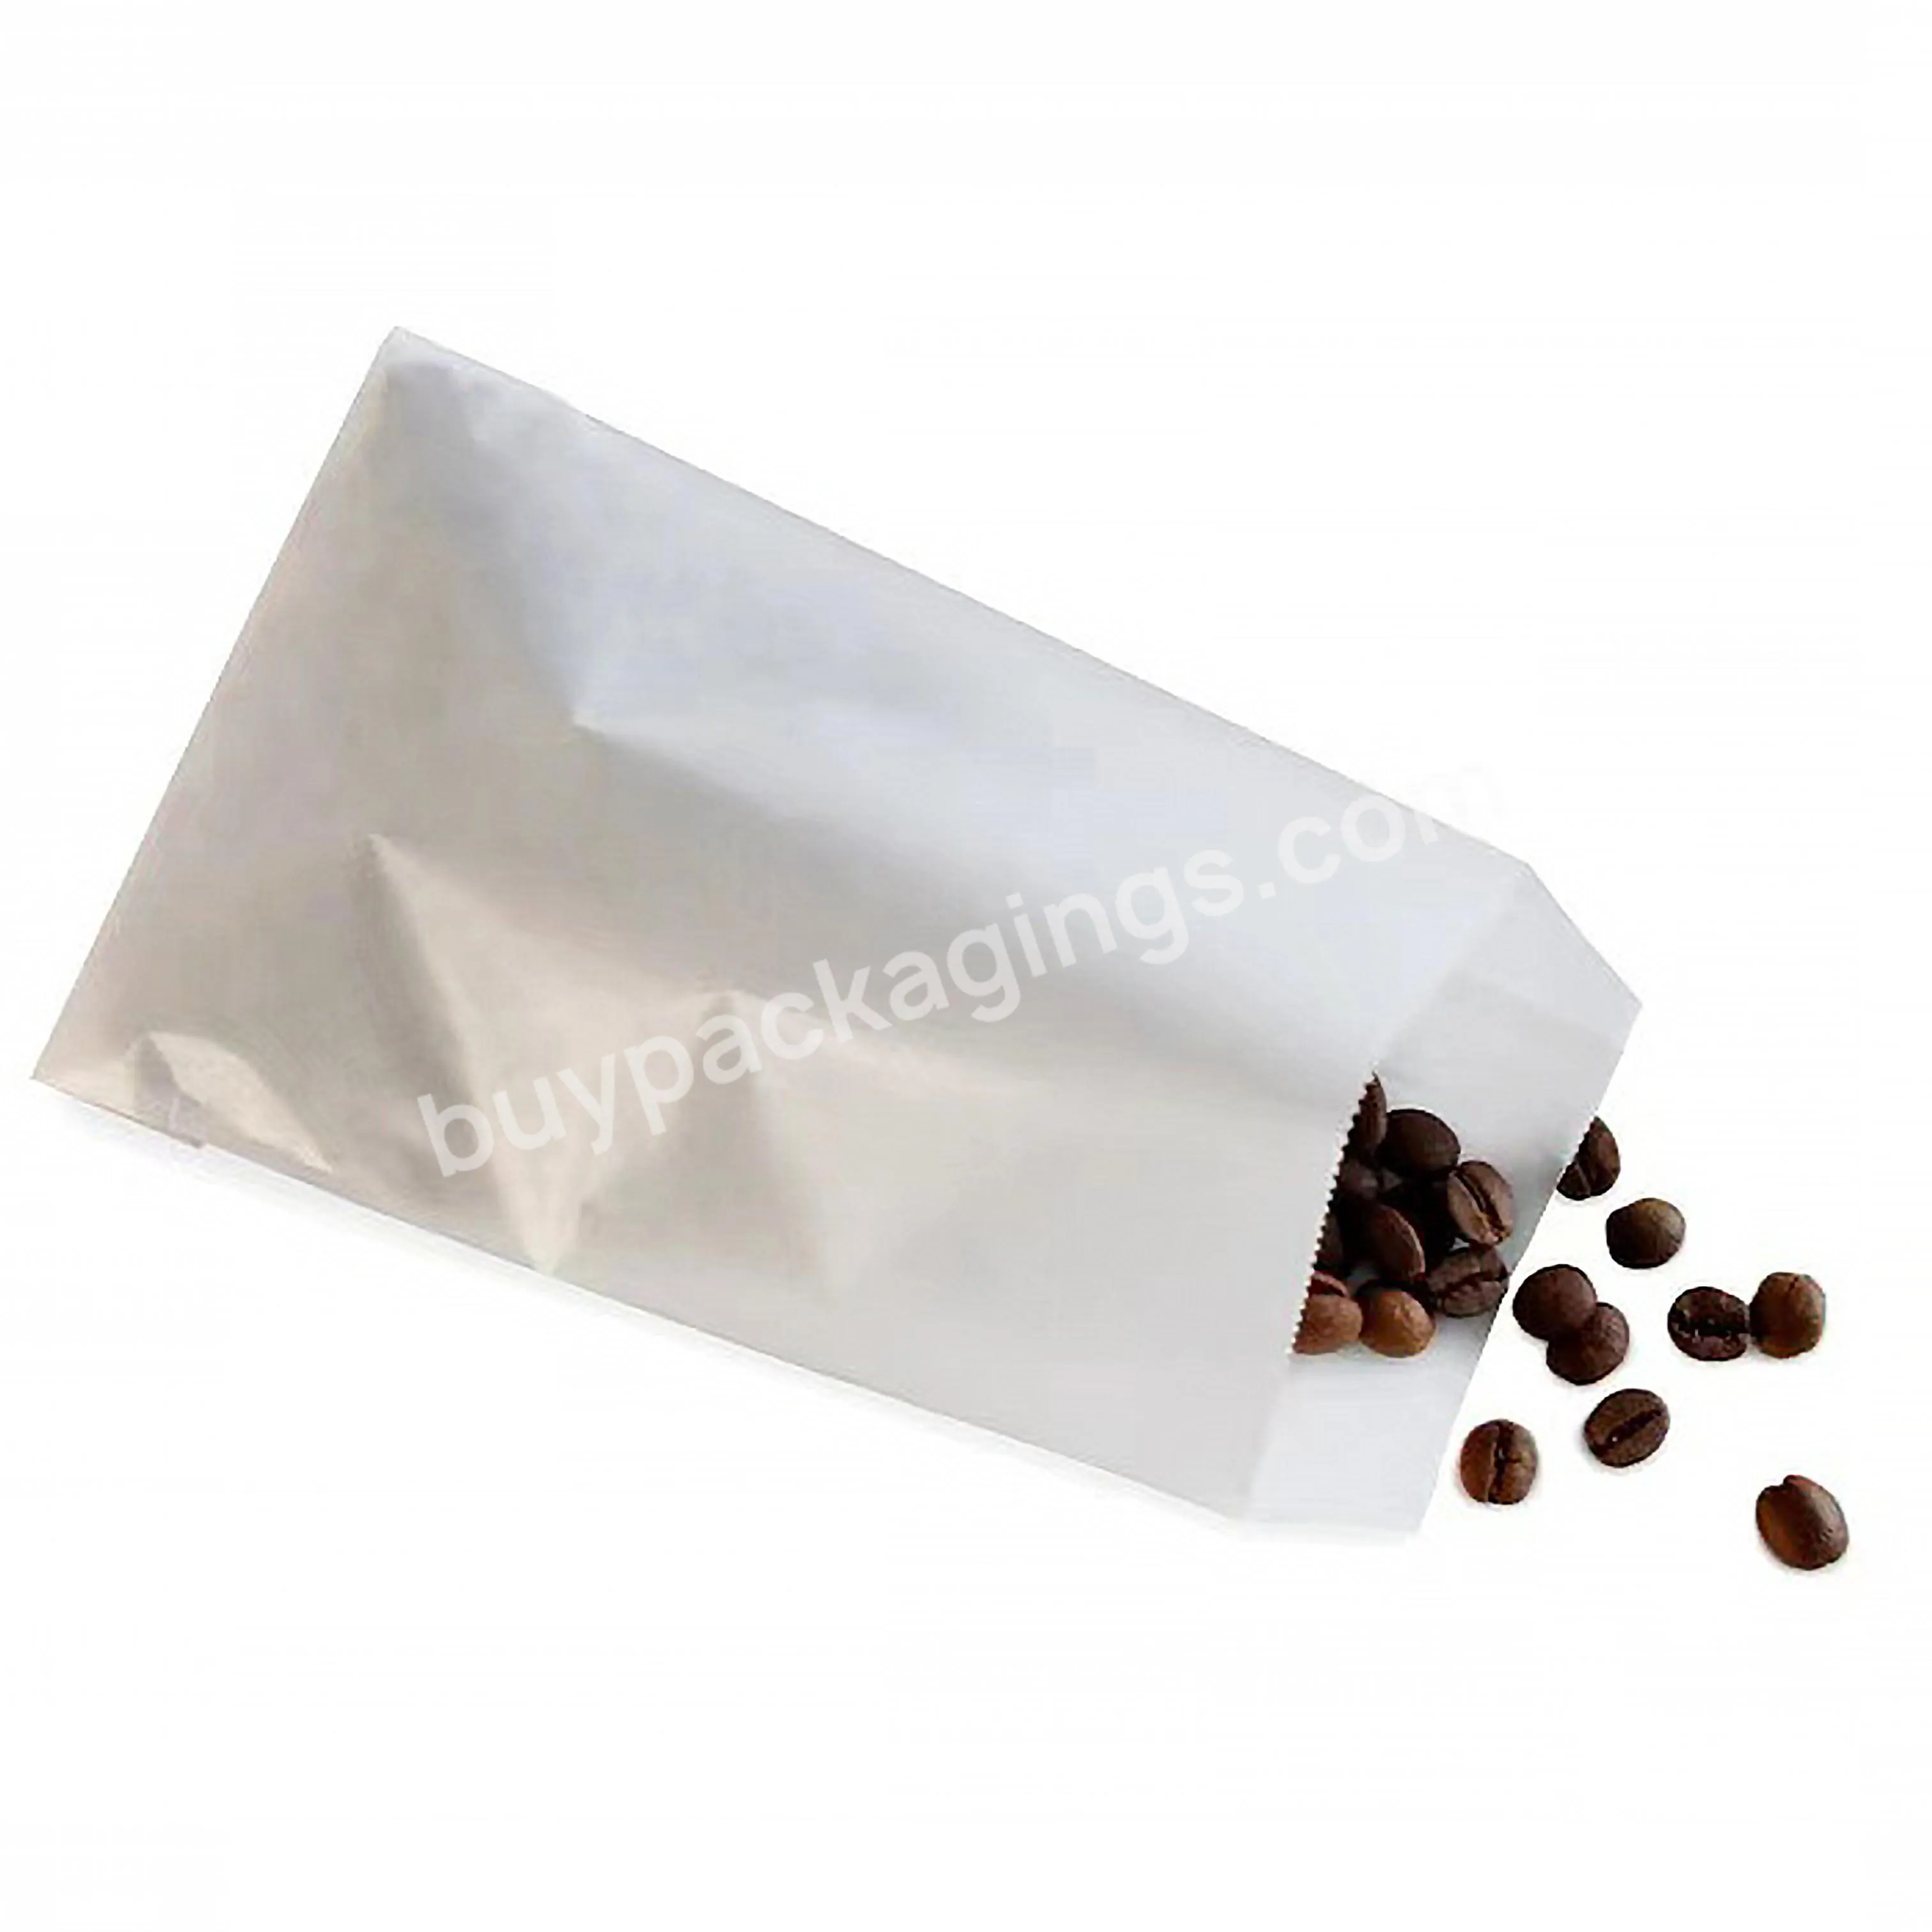 Compostable Food Packaging For Clothes Mailer Mini Envelope Small Flat Glassine Waxed Paper Cookie Snack Bags